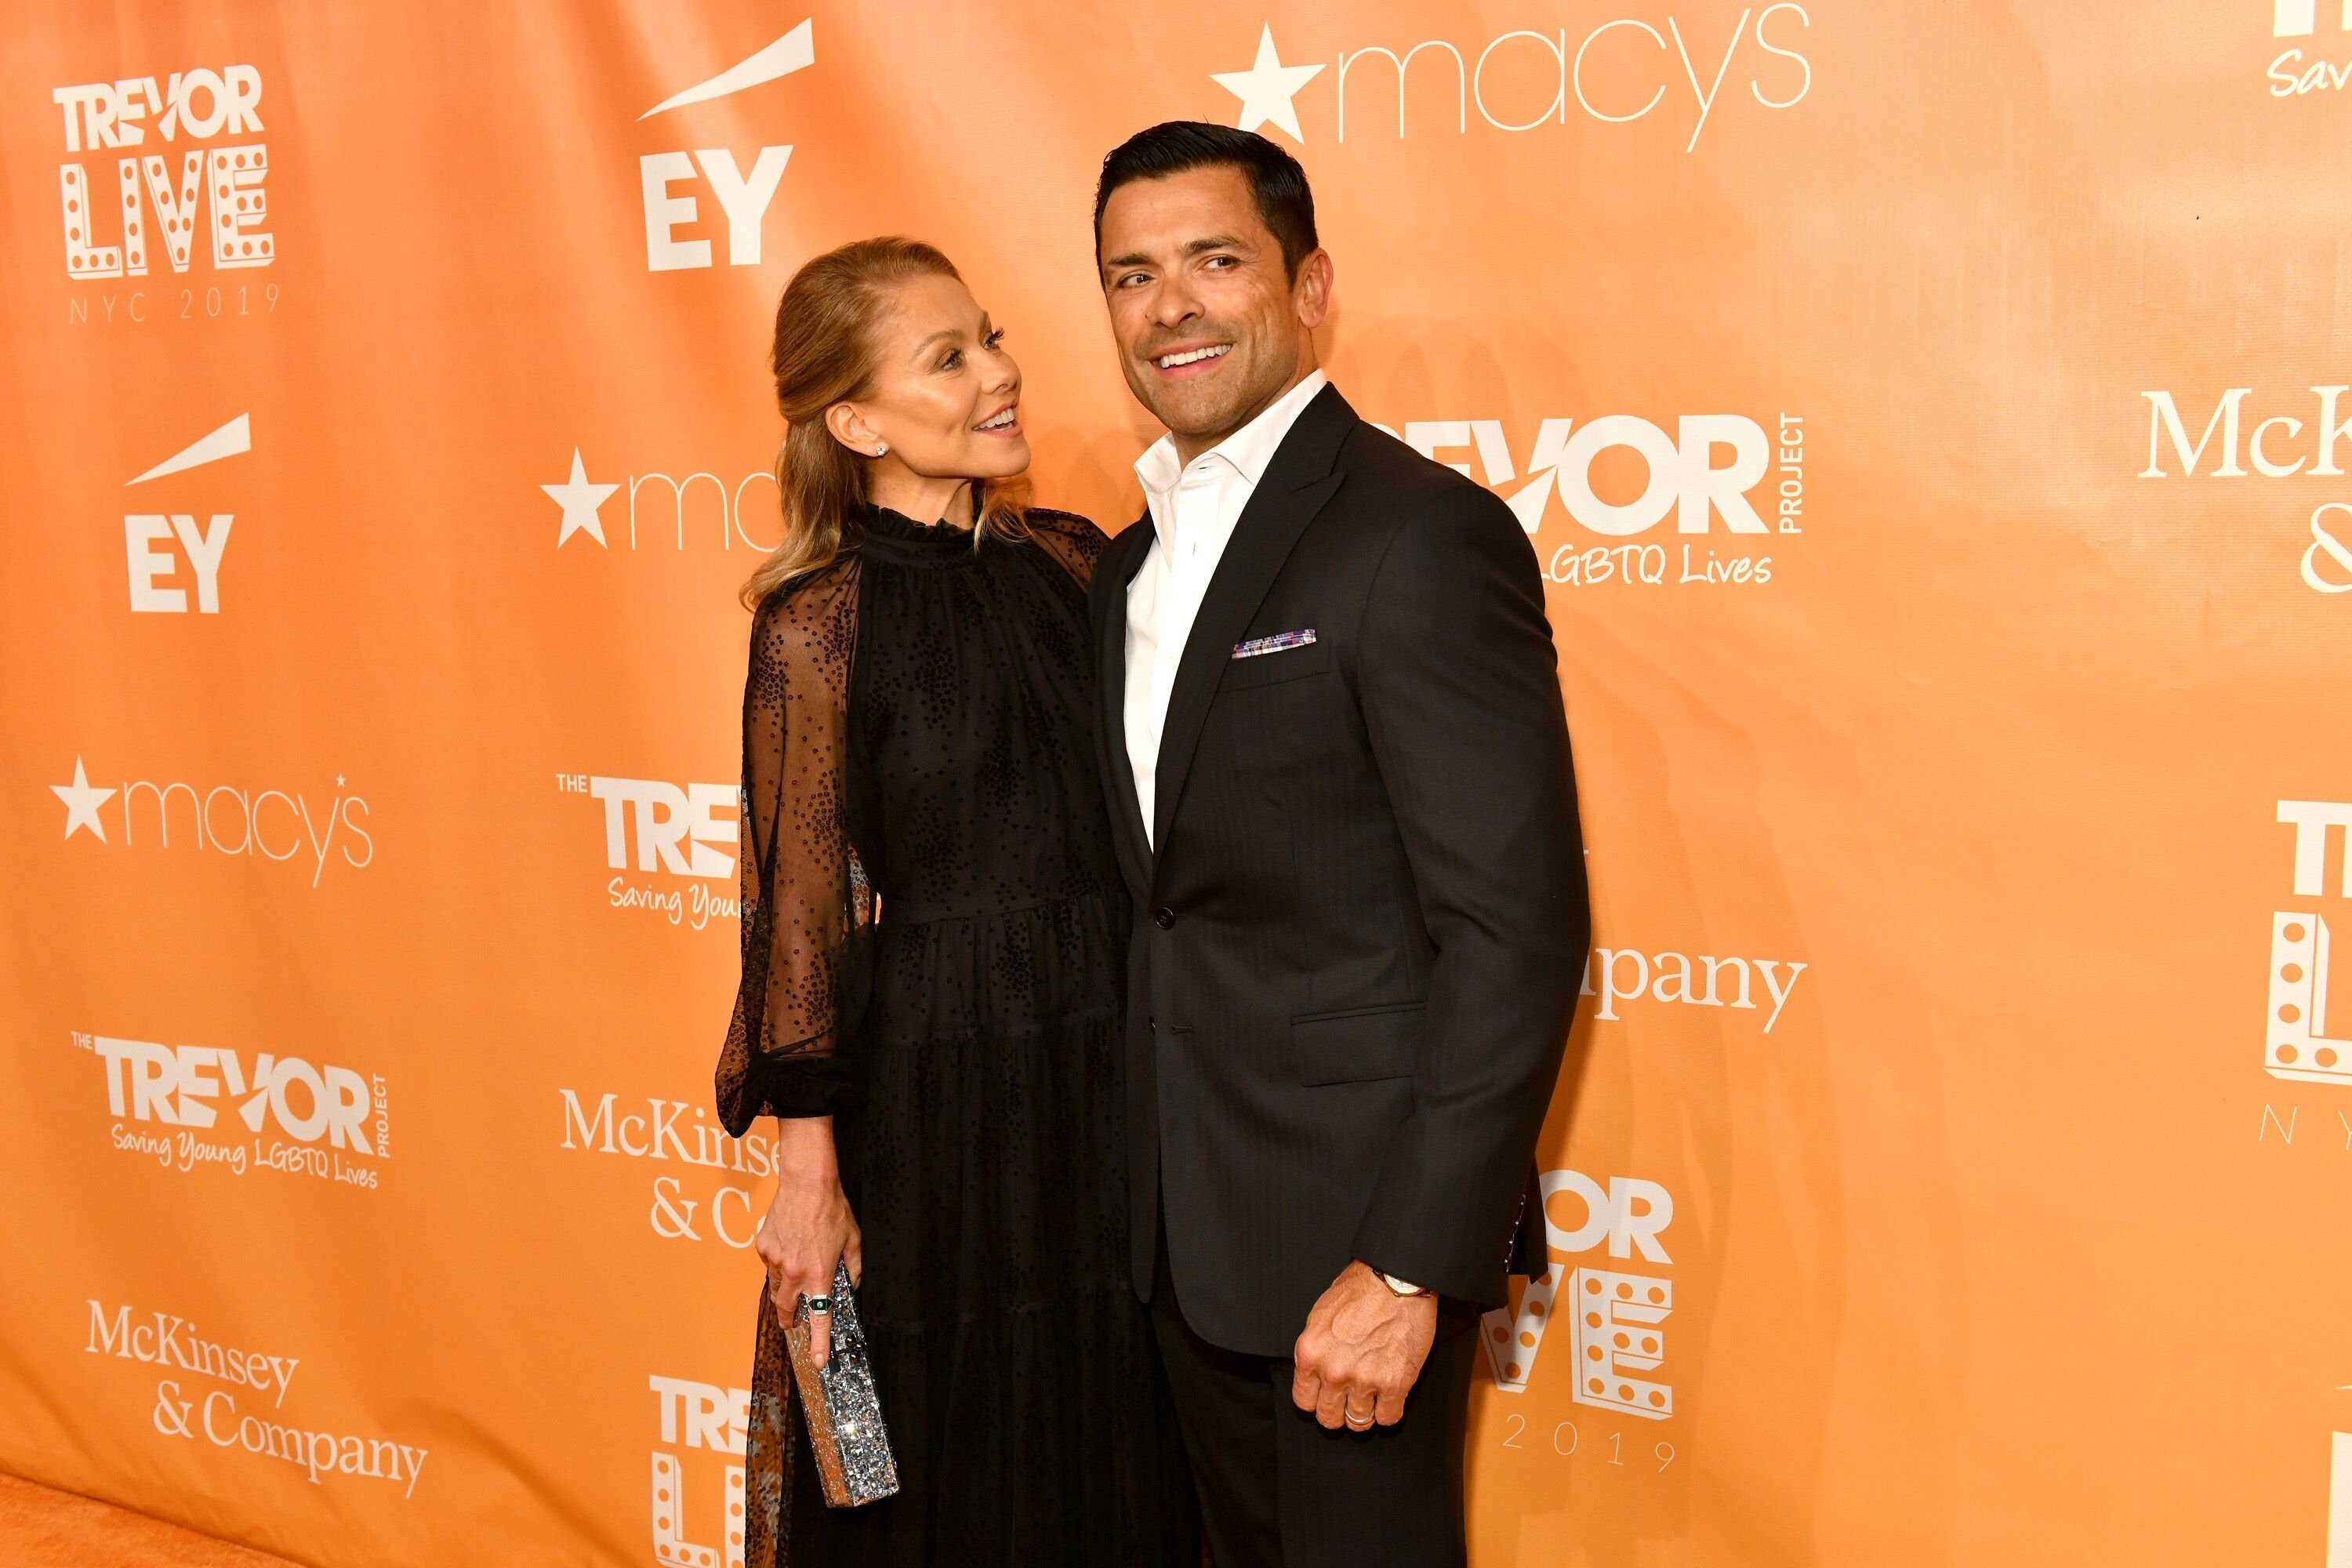 Kelly Ripa and Mark Consuelos at the TrevorLIVE New York Gala on June 17, 2019, in New York City | Photo: Dia Dipasupil/Getty Images